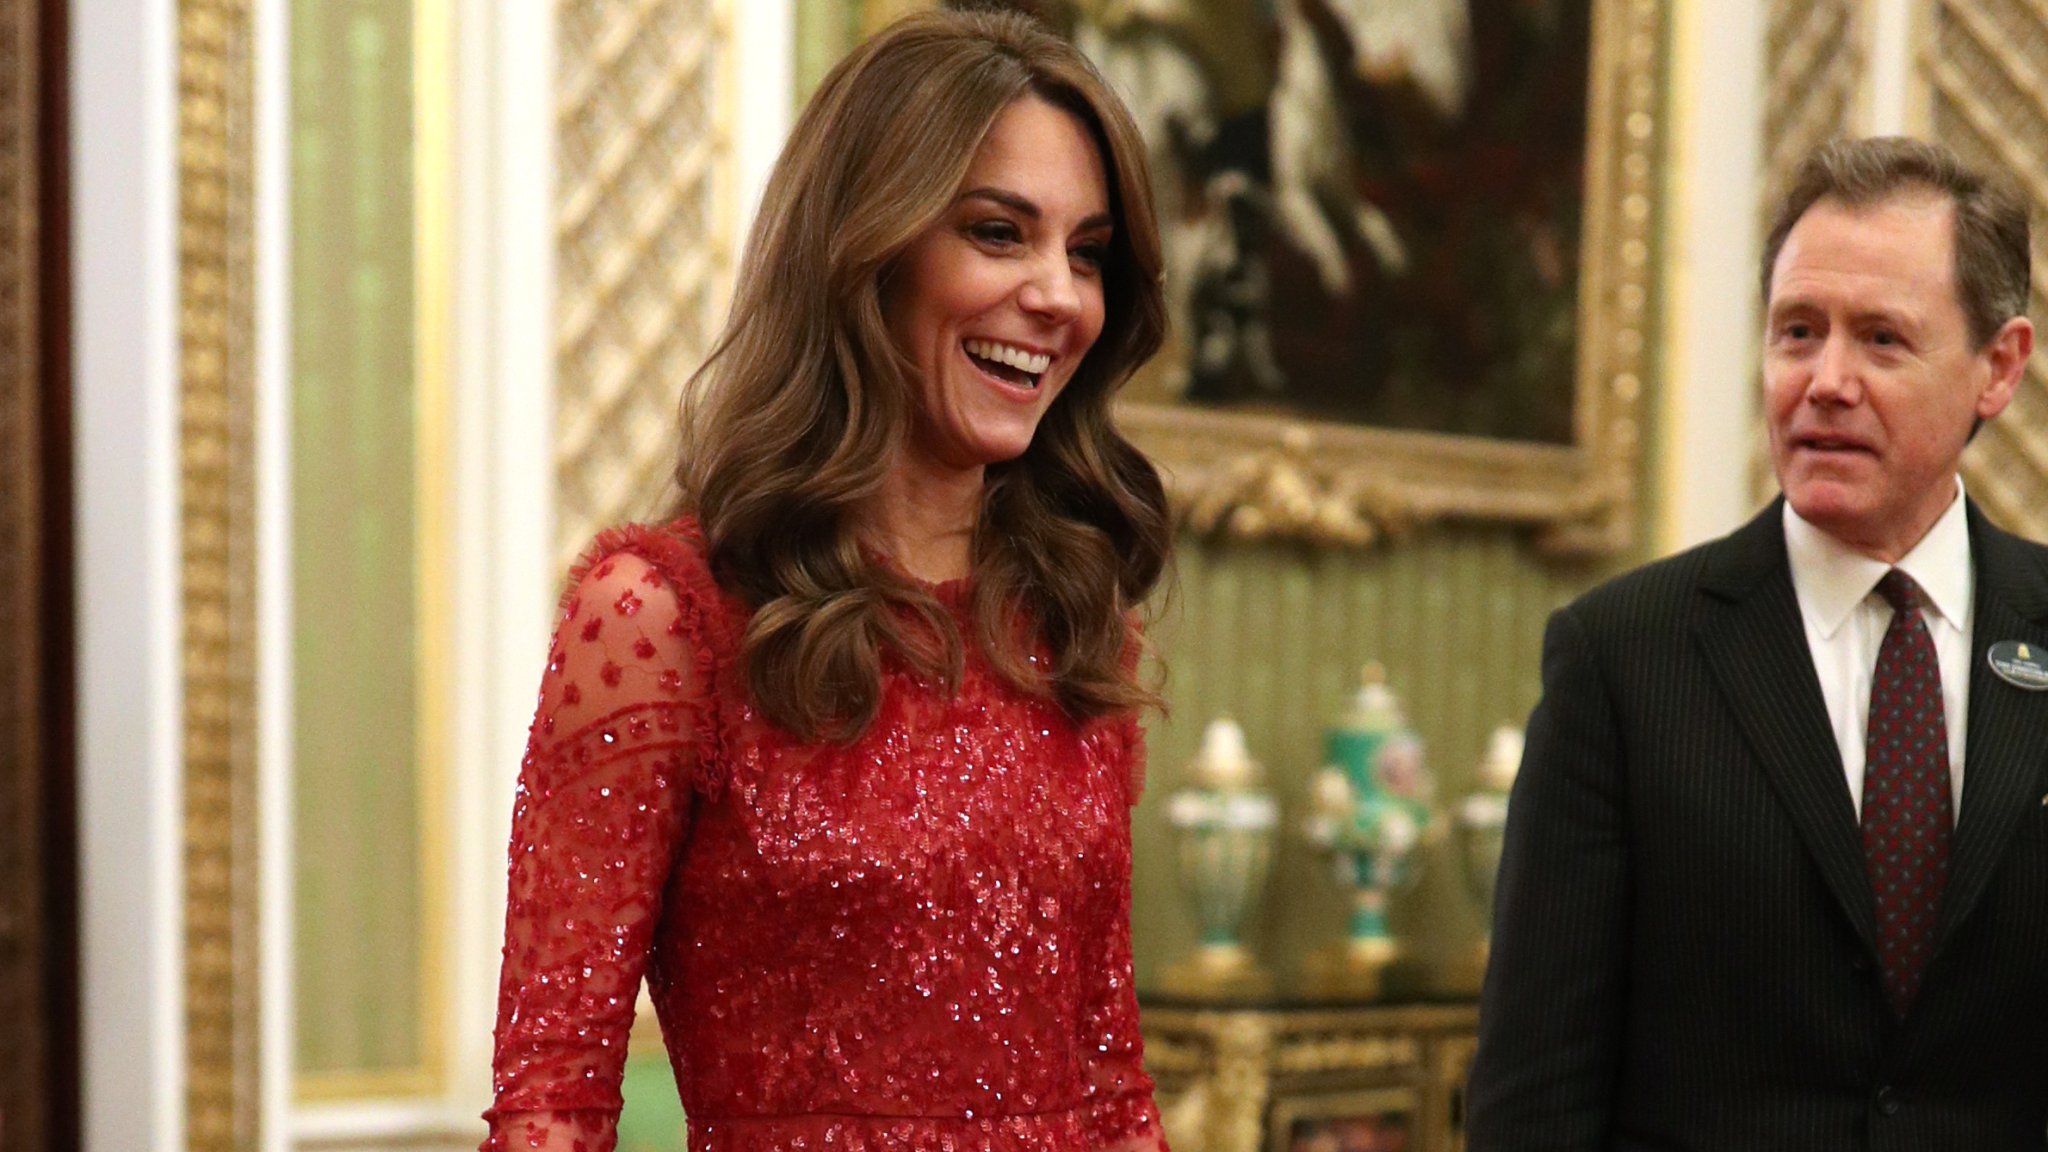 Kate Middleton Is Painting The Town Red